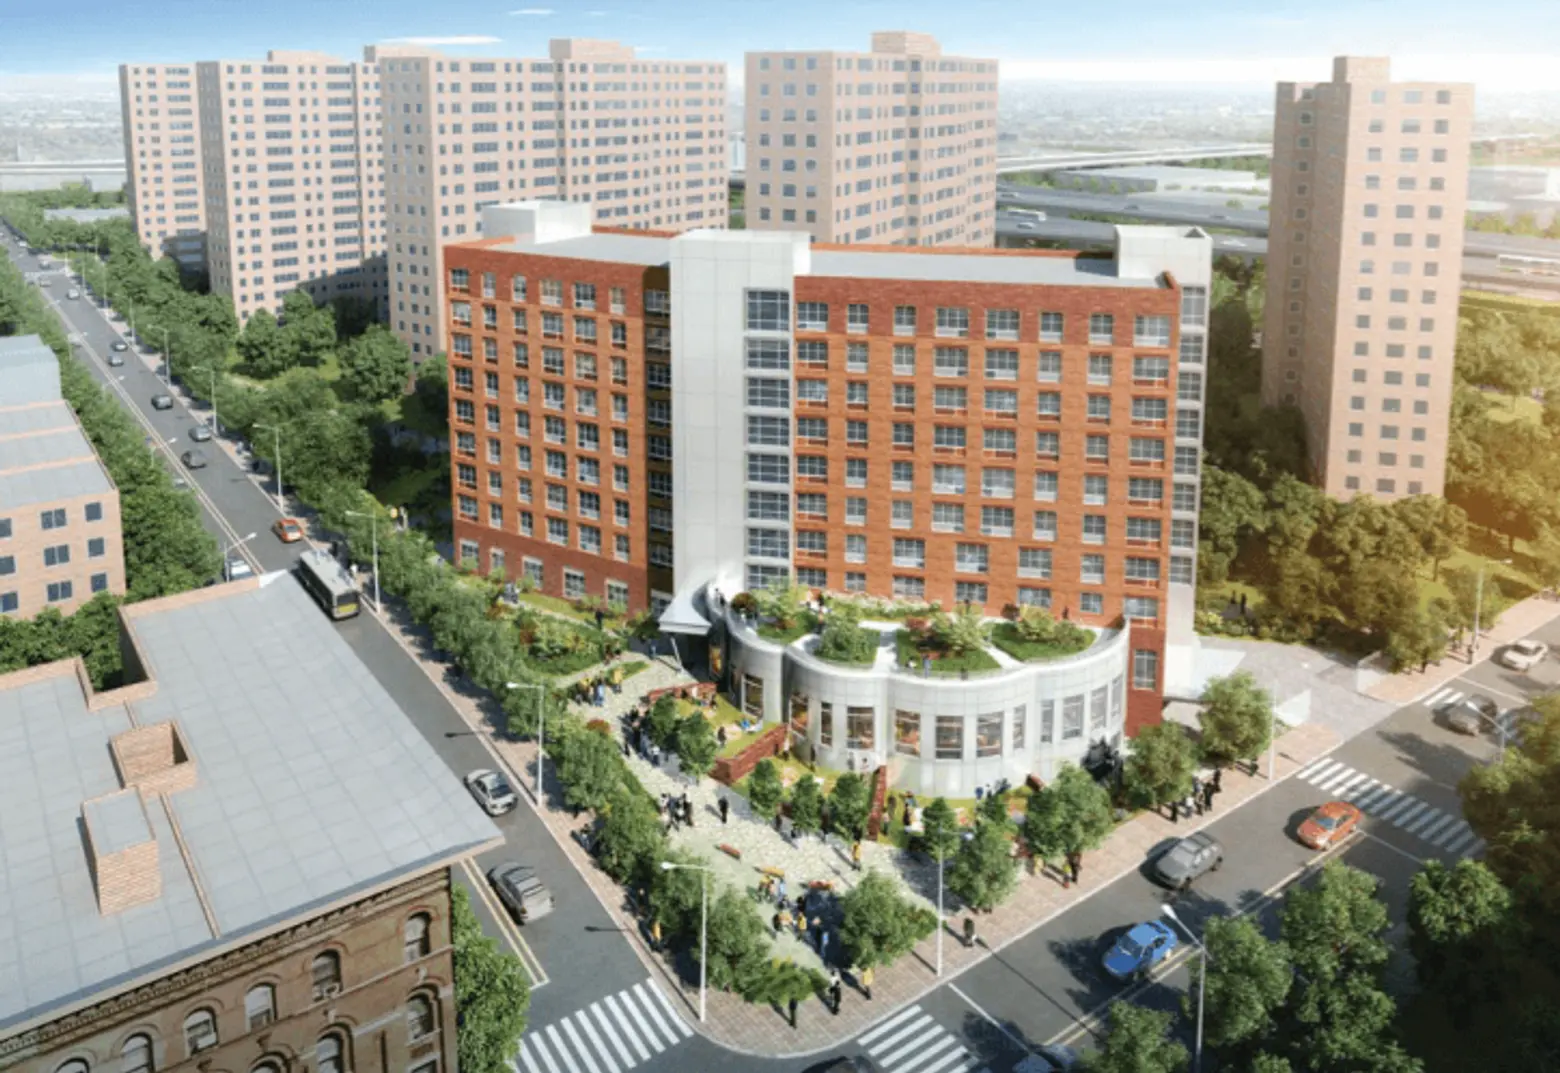 Low-income senior housing lottery opens for 83 units at Perkins Eastman-designed building in Mott Haven